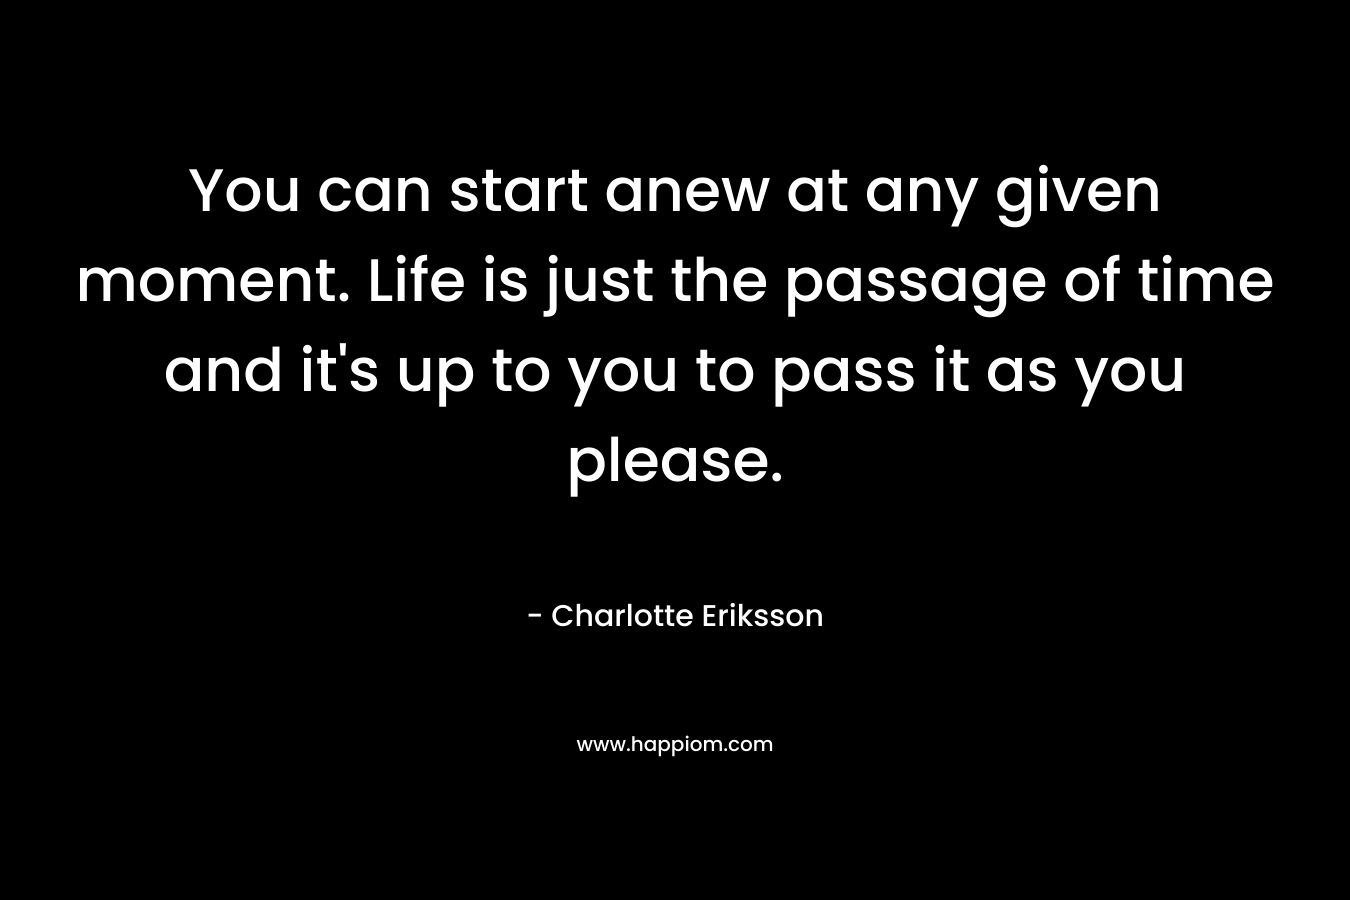 You can start anew at any given moment. Life is just the passage of time and it's up to you to pass it as you please.